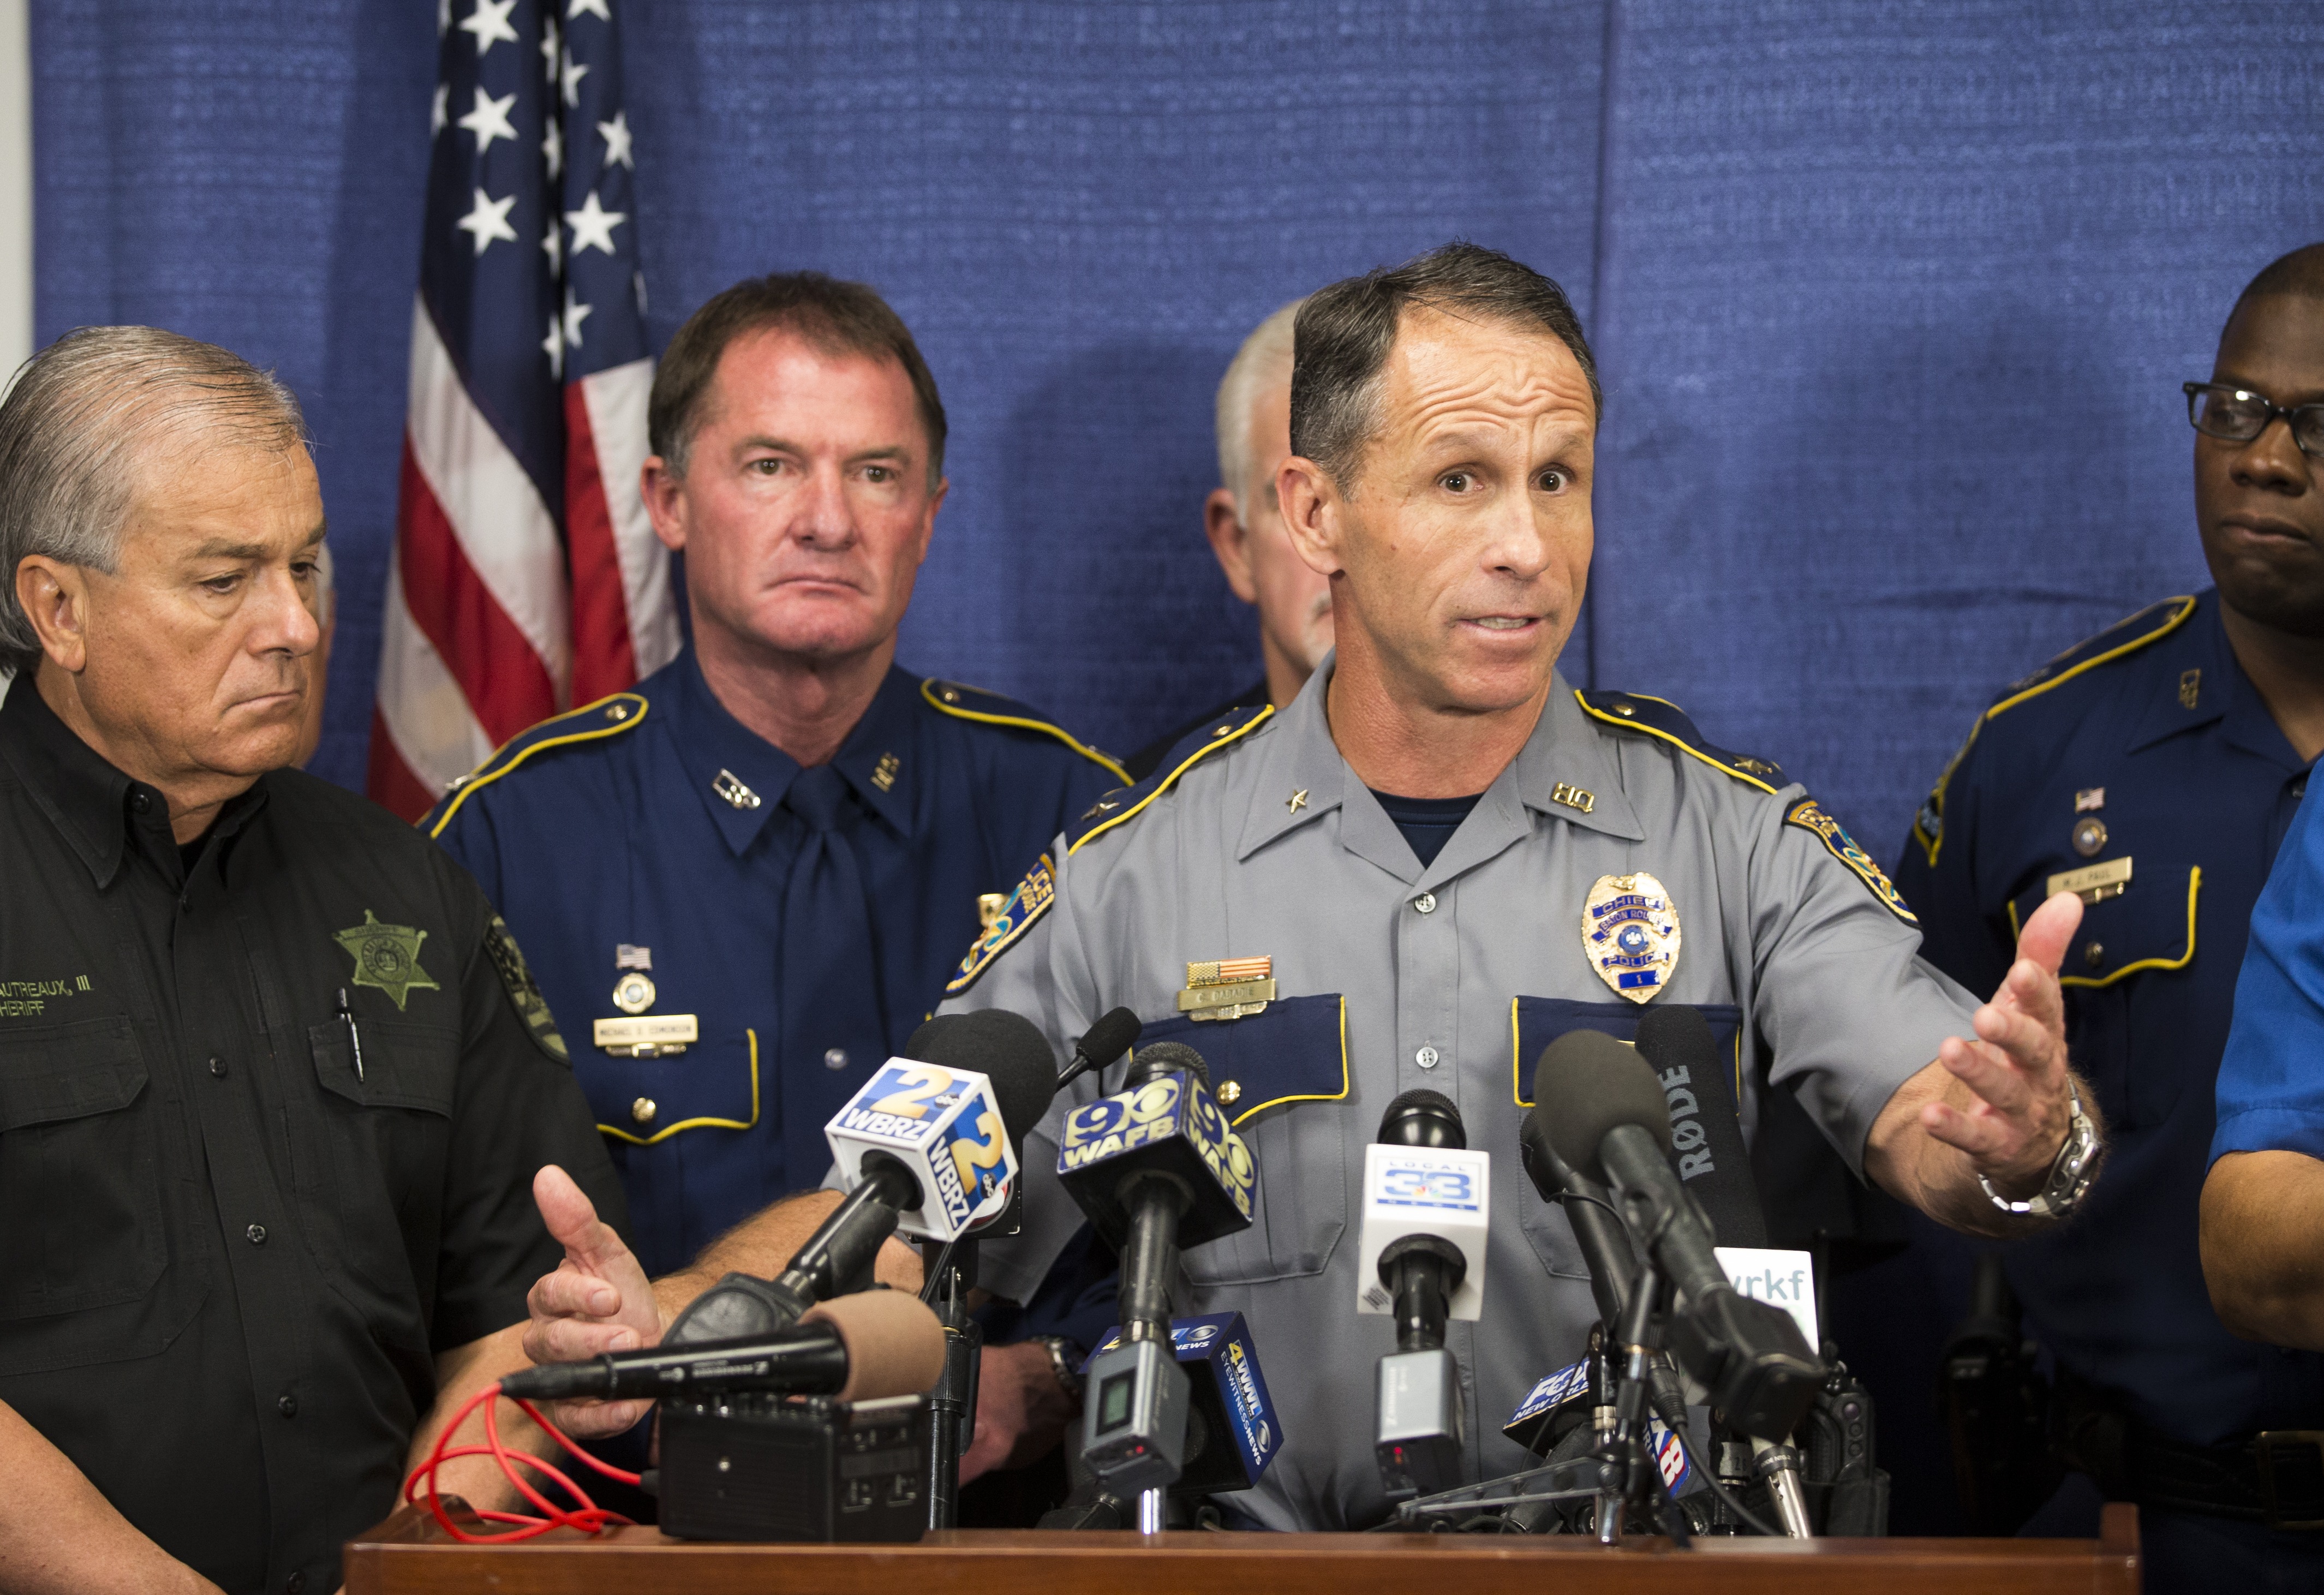 Baton Rouge Chief of Police Carl Dabadie speaks during a press conference at the Office of Homeland Security and Emergency Preparedness on July 10, 2016 in Baton Rouge, Louisiana.  (Getty)